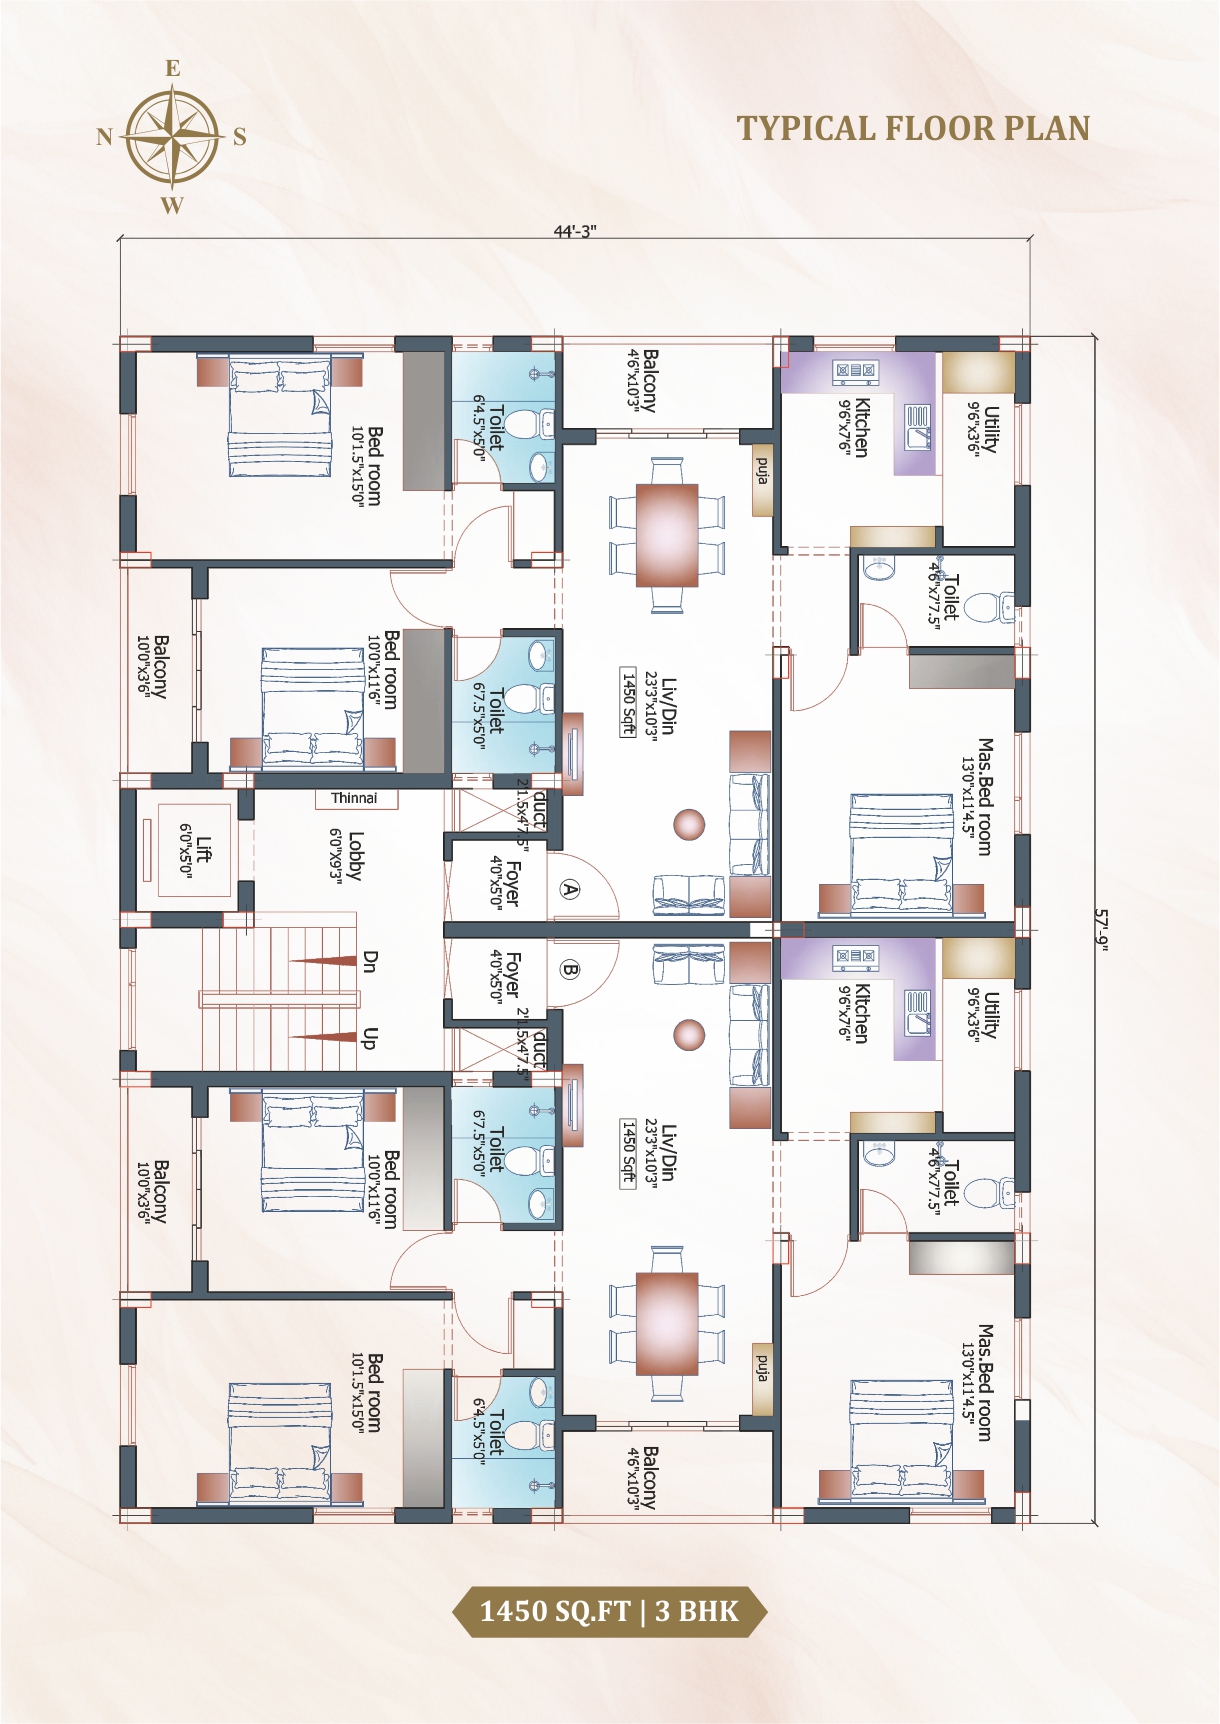 https://firmfoundations.in/projects/floorplans/thumbnails/17060848026Tranquil_Typical.jpg